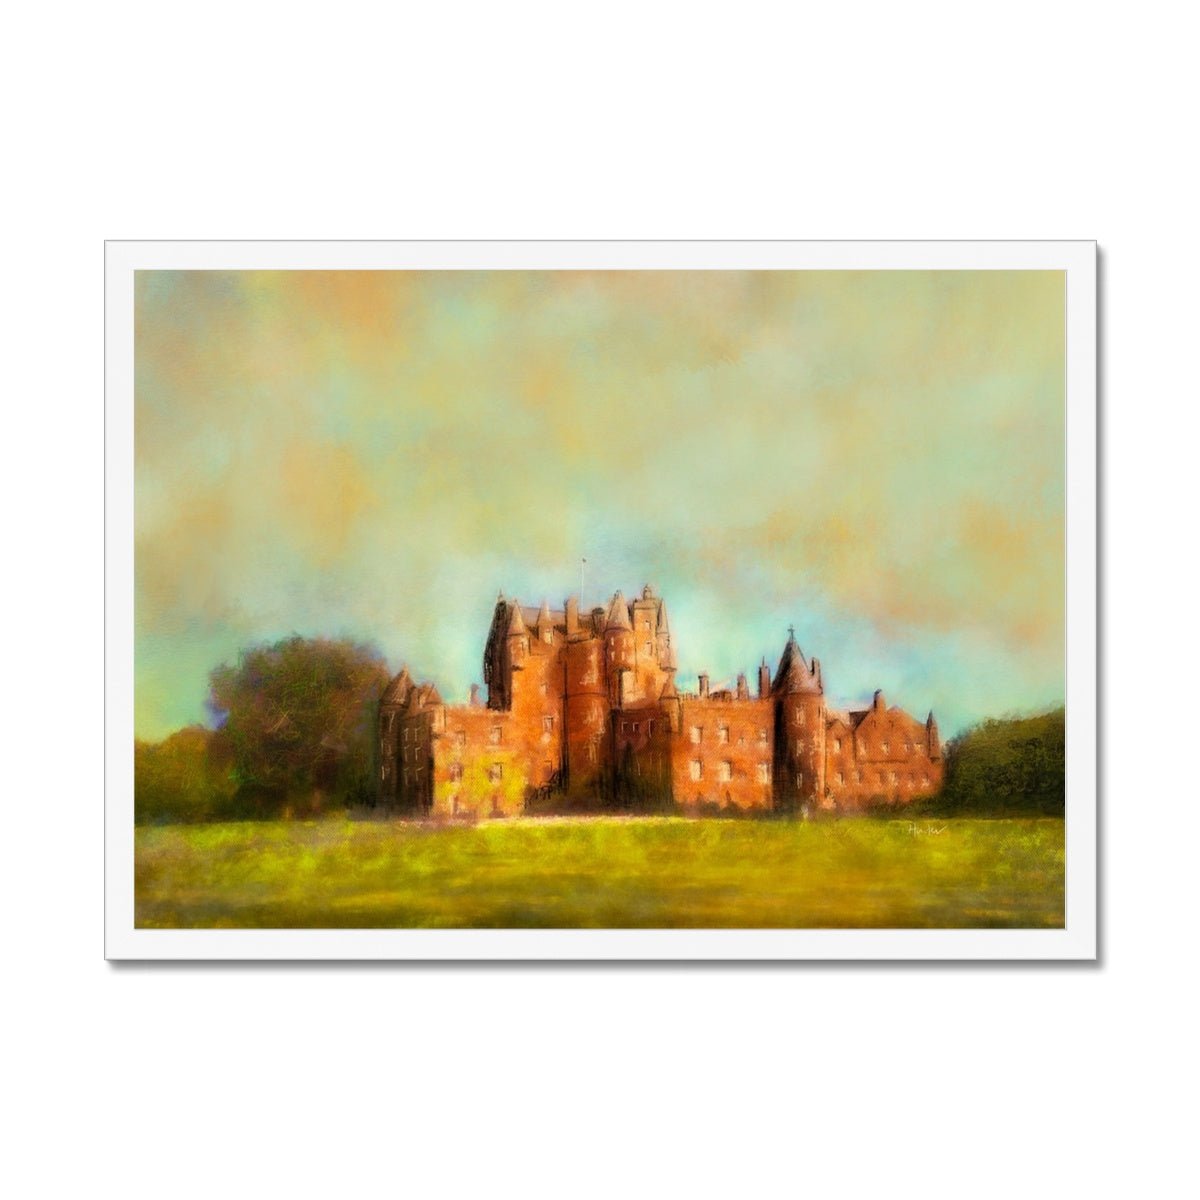 Glamis Castle Painting | Framed Prints From Scotland-Framed Prints-Historic & Iconic Scotland Art Gallery-A2 Landscape-White Frame-Paintings, Prints, Homeware, Art Gifts From Scotland By Scottish Artist Kevin Hunter